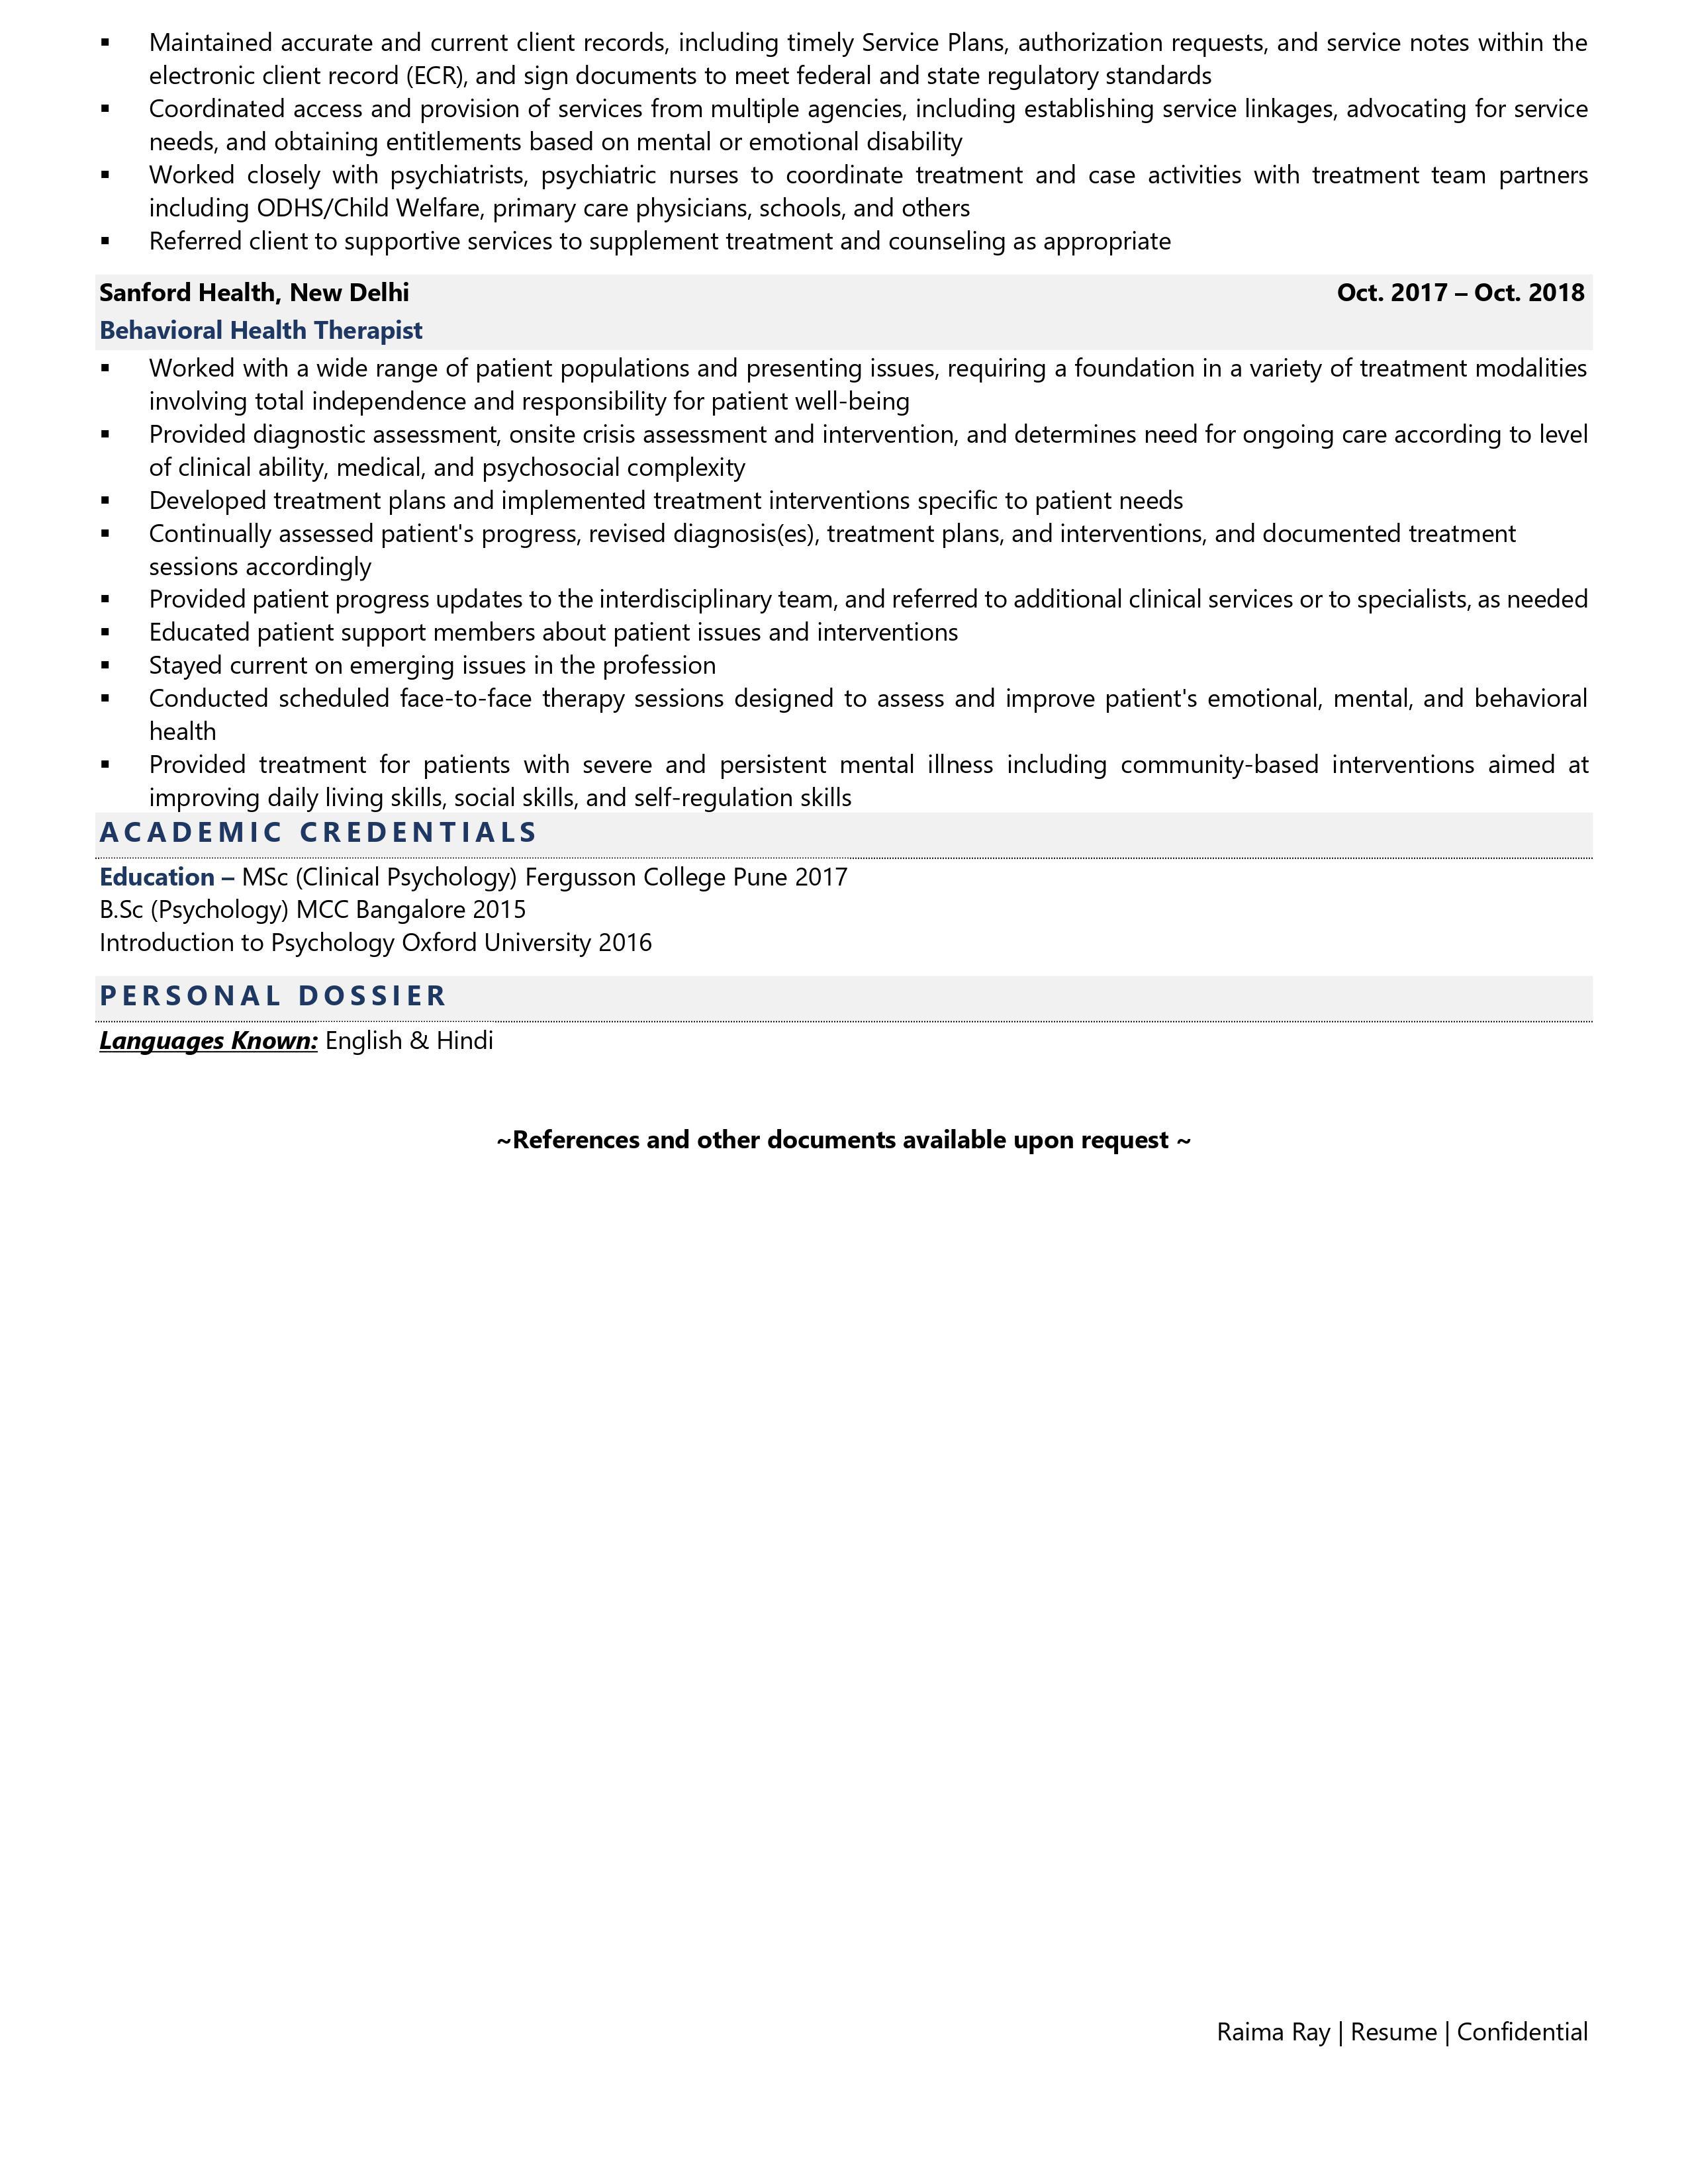 Mental Health Counselor - Resume Example & Template